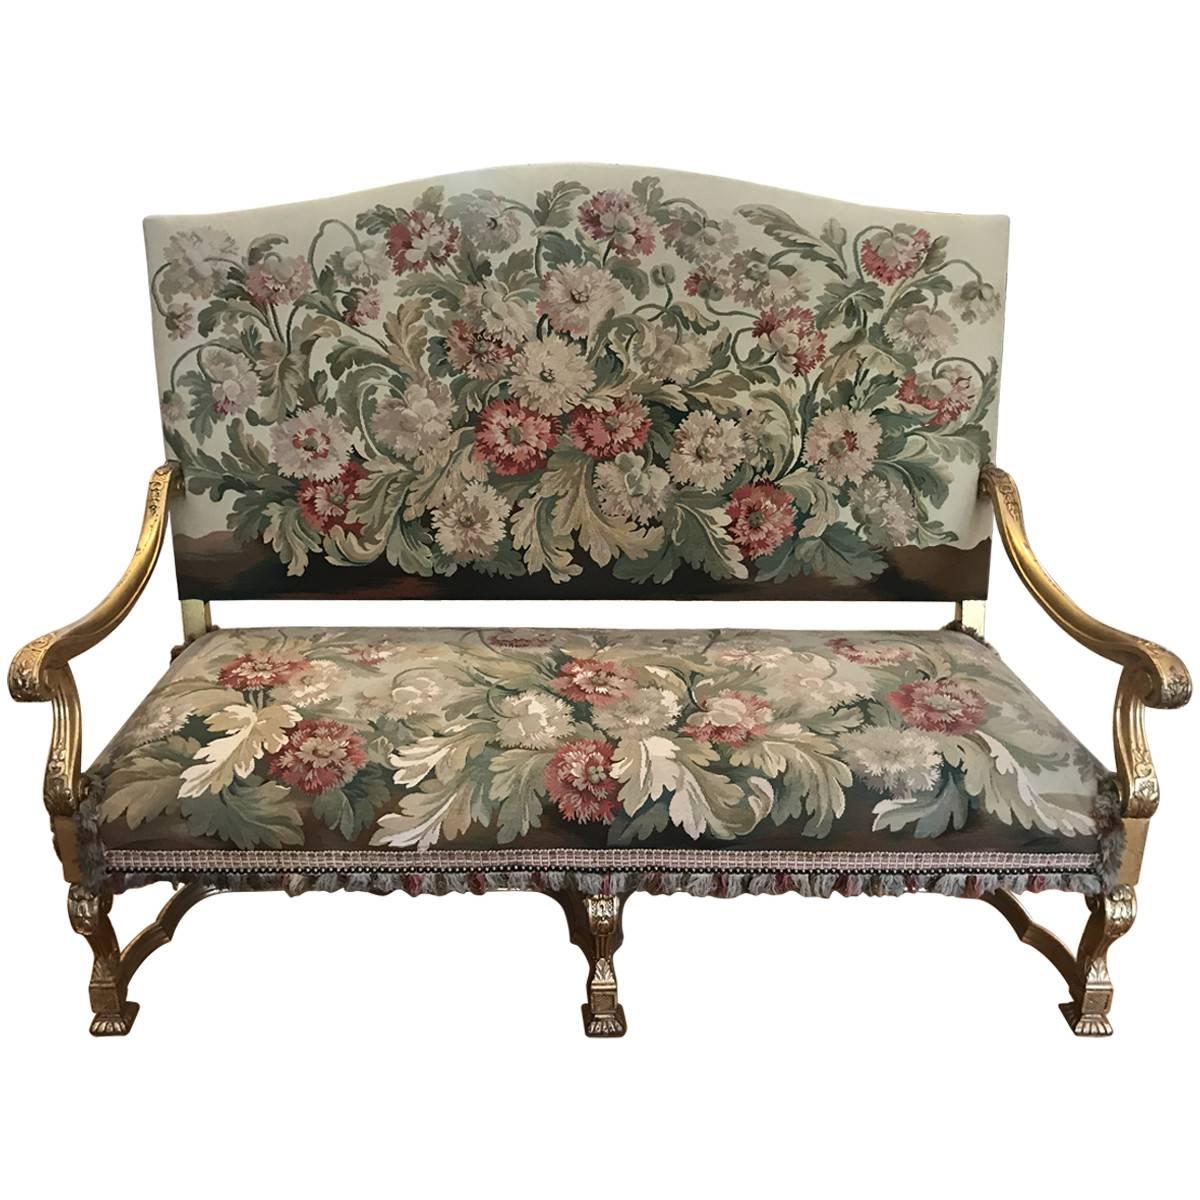 19th Century Aubesson Giltwood and Handmade Tapestry Settee For Sale